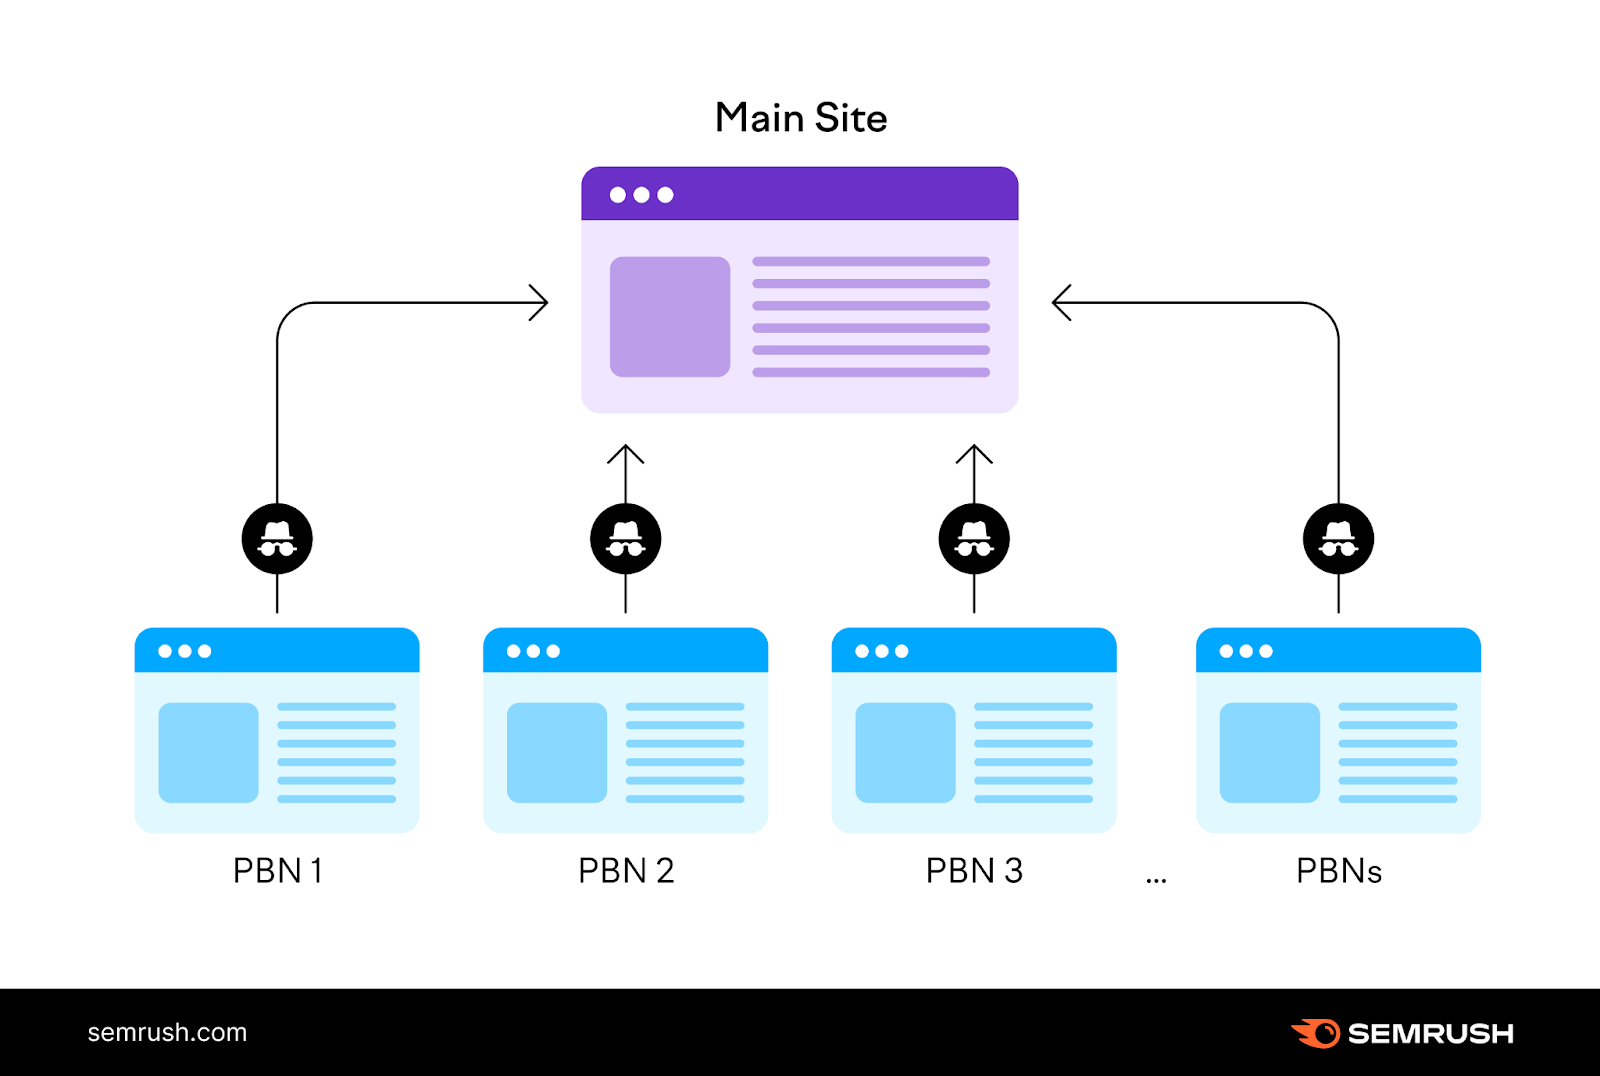 a visual representation of Private Blog Networks (PBNs)